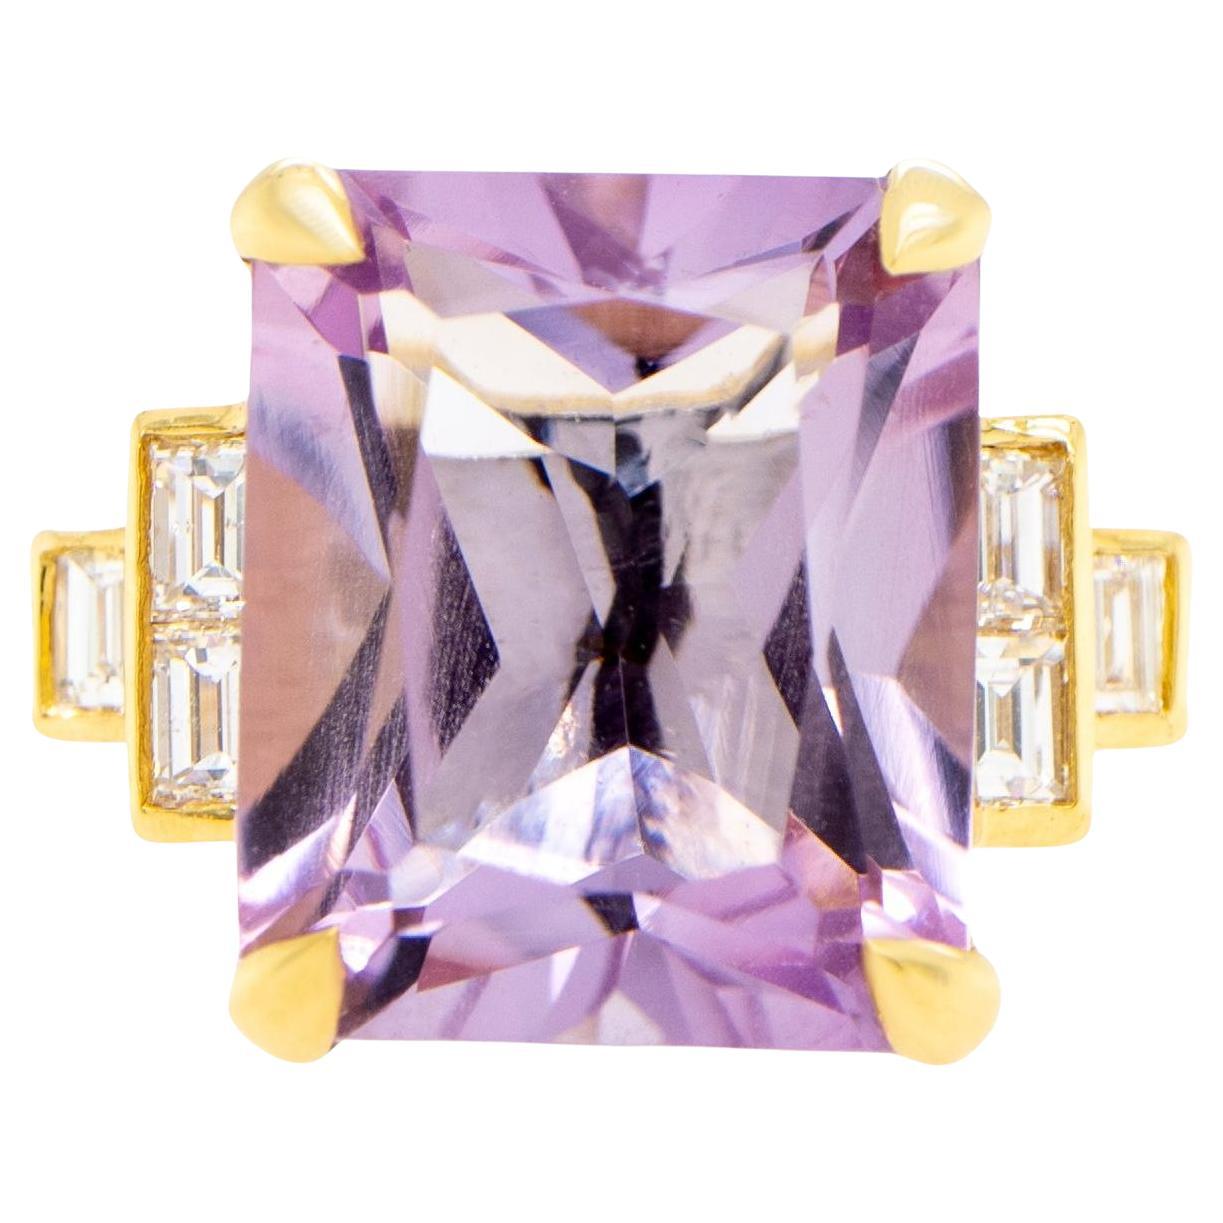 Lavender Amethyst Ring Diamond Setting 5.65 Carats 18K Gold For Sale